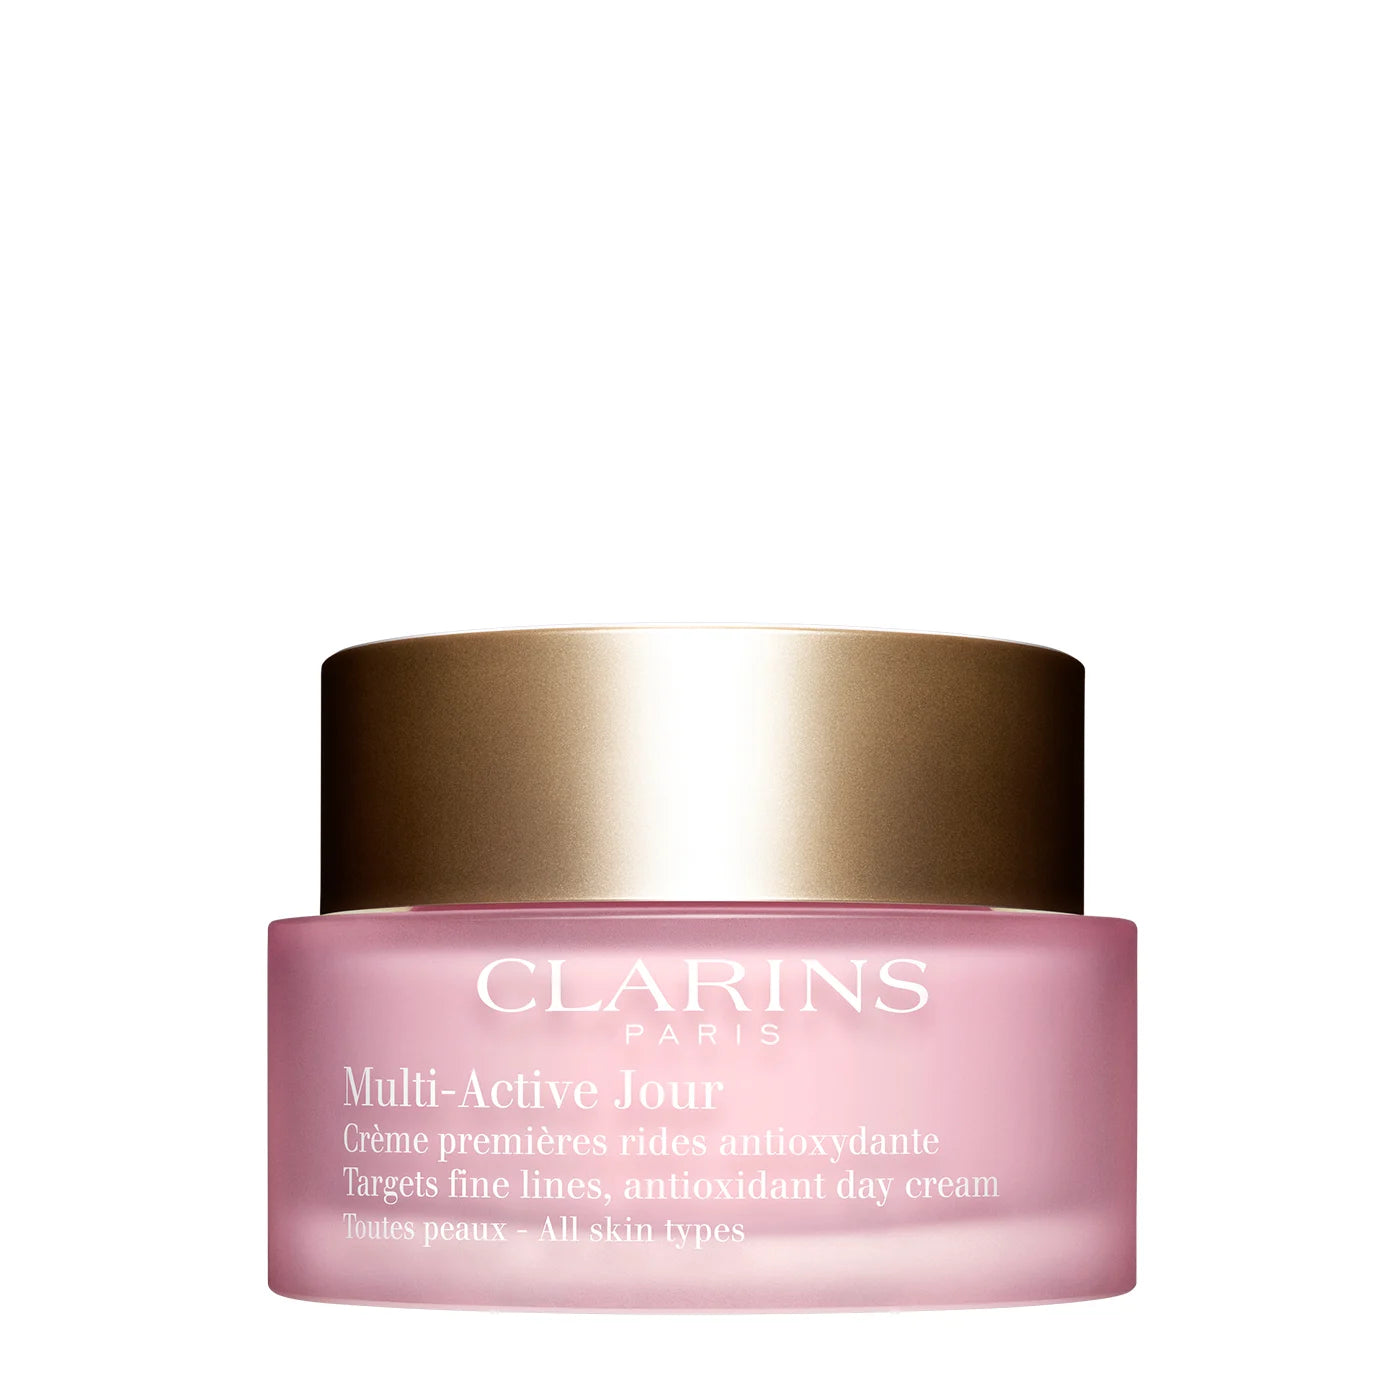 Clarins - Multi-Active Jour - Cream for All Skin (50ml)